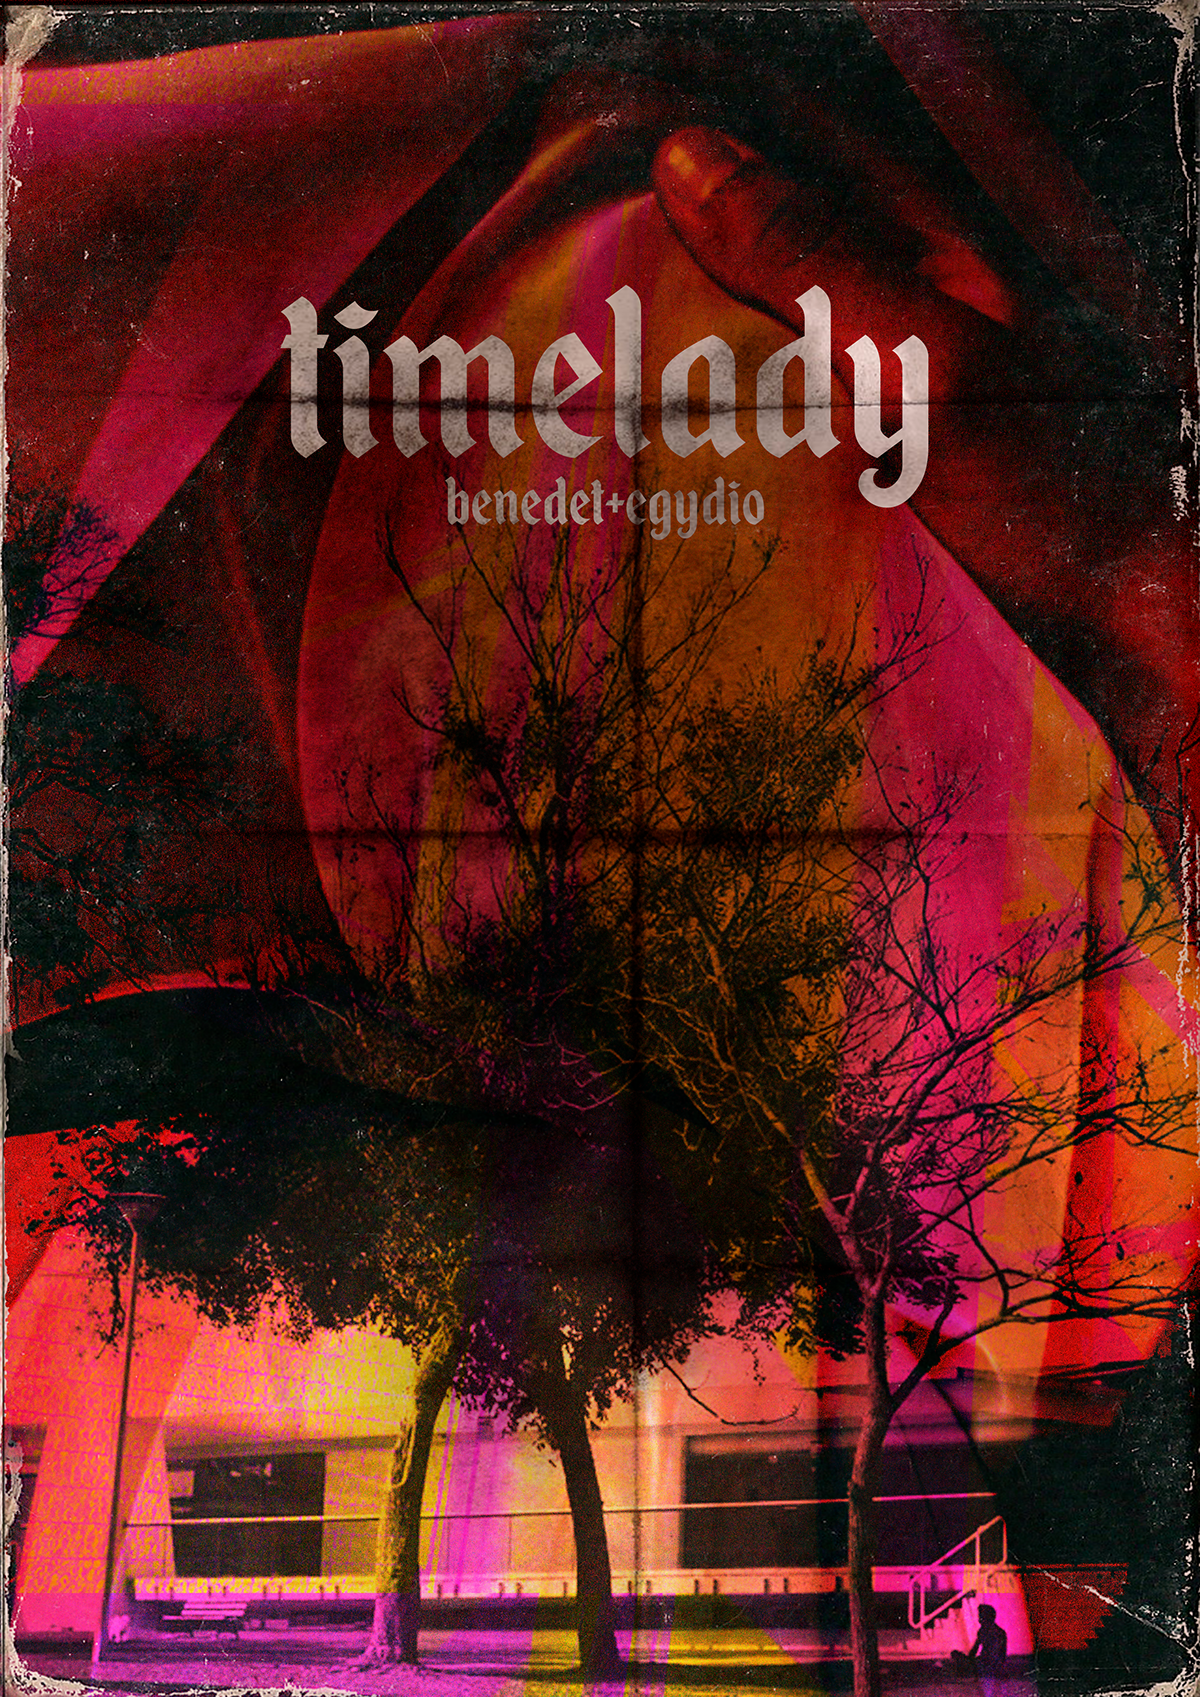 lica benedet Lost Boys lucas egydio timelady About Time about art only art poster cartaz